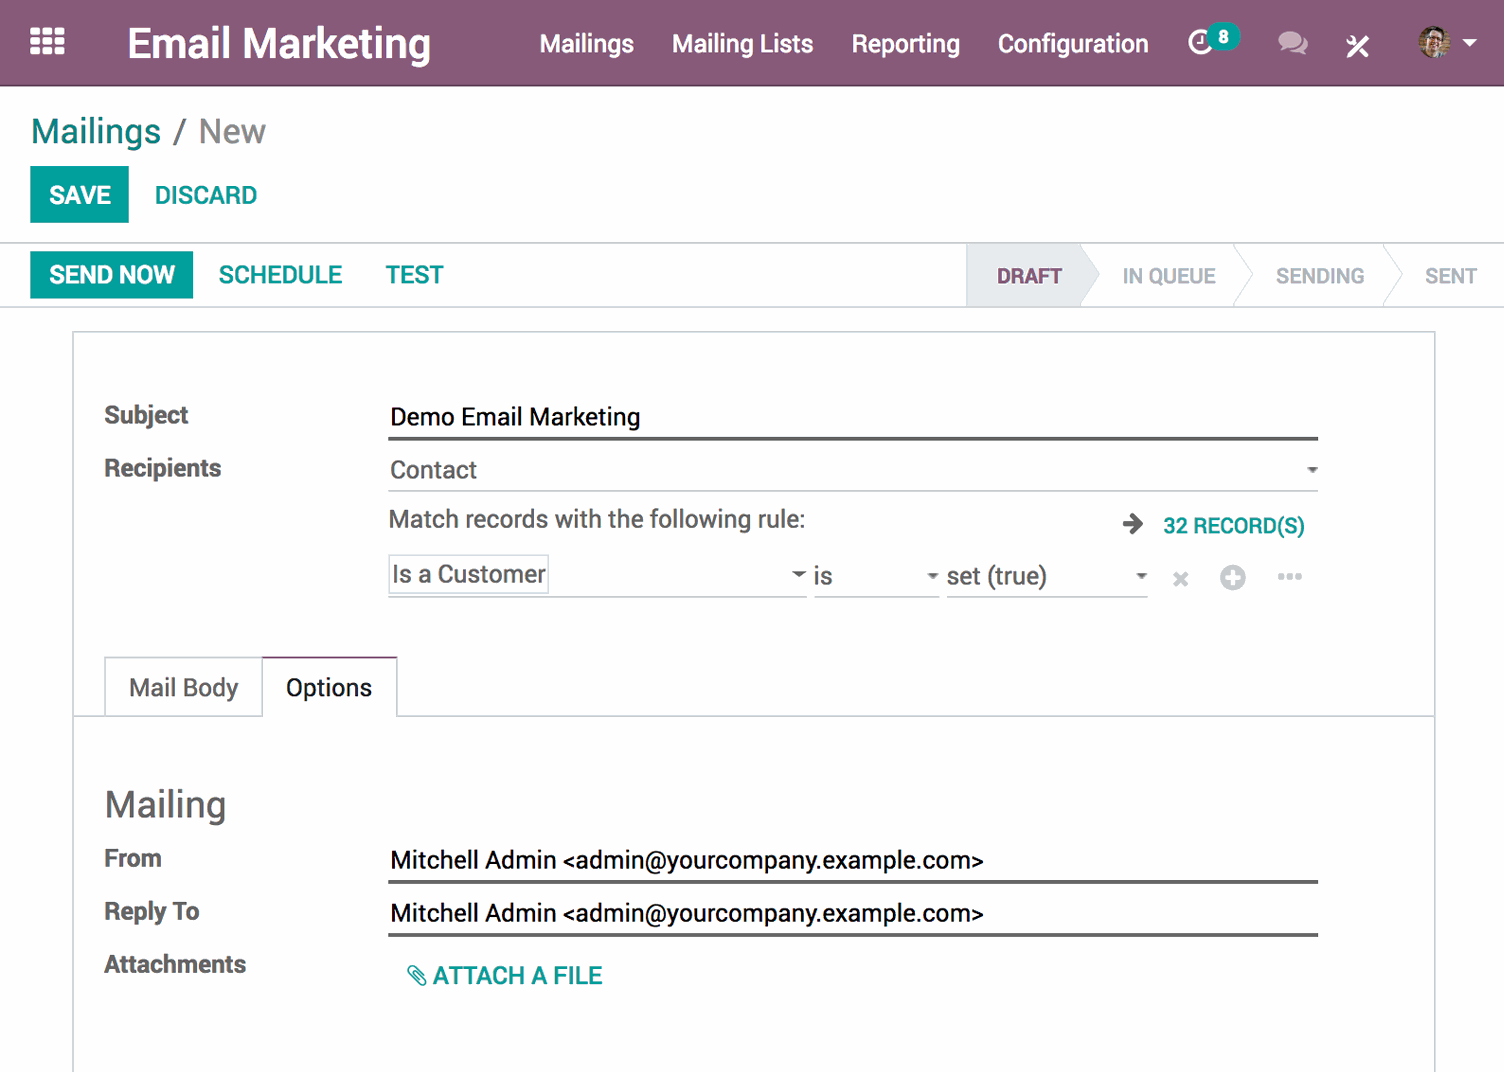 Odoo Email Marketing interface - creating a new mailing list